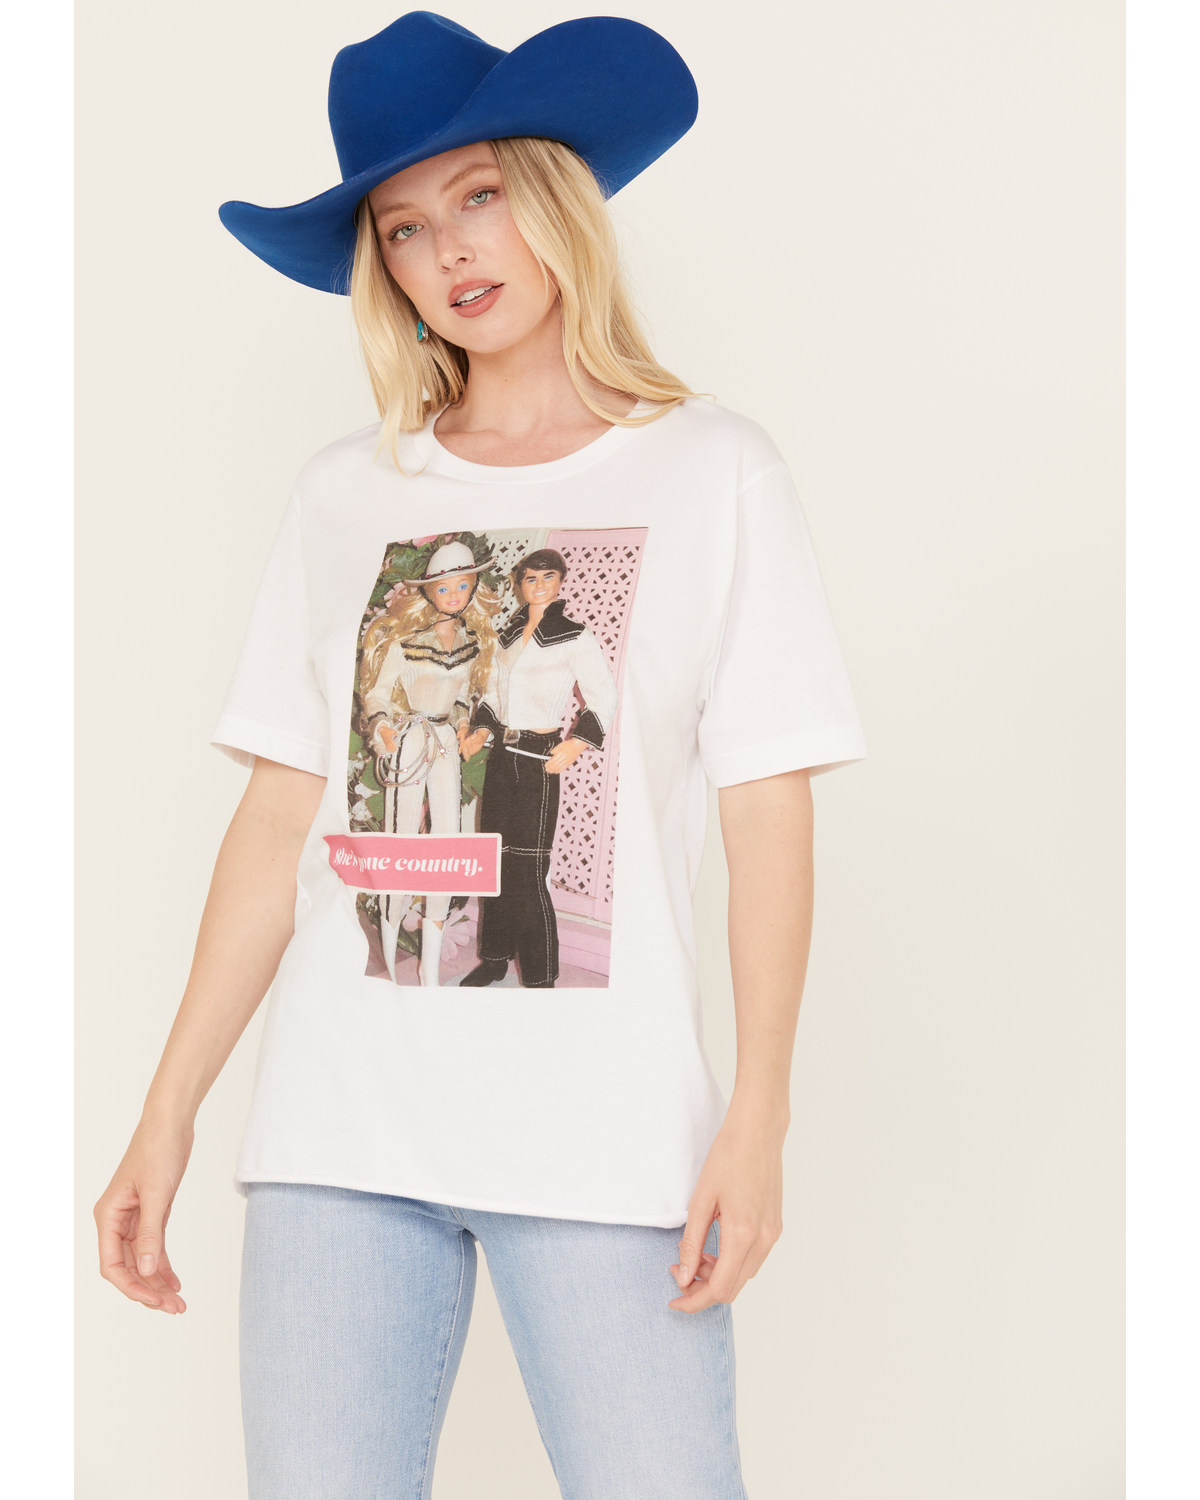 Gina Tees Women's Embellished She's Gone Country Graphic Tee